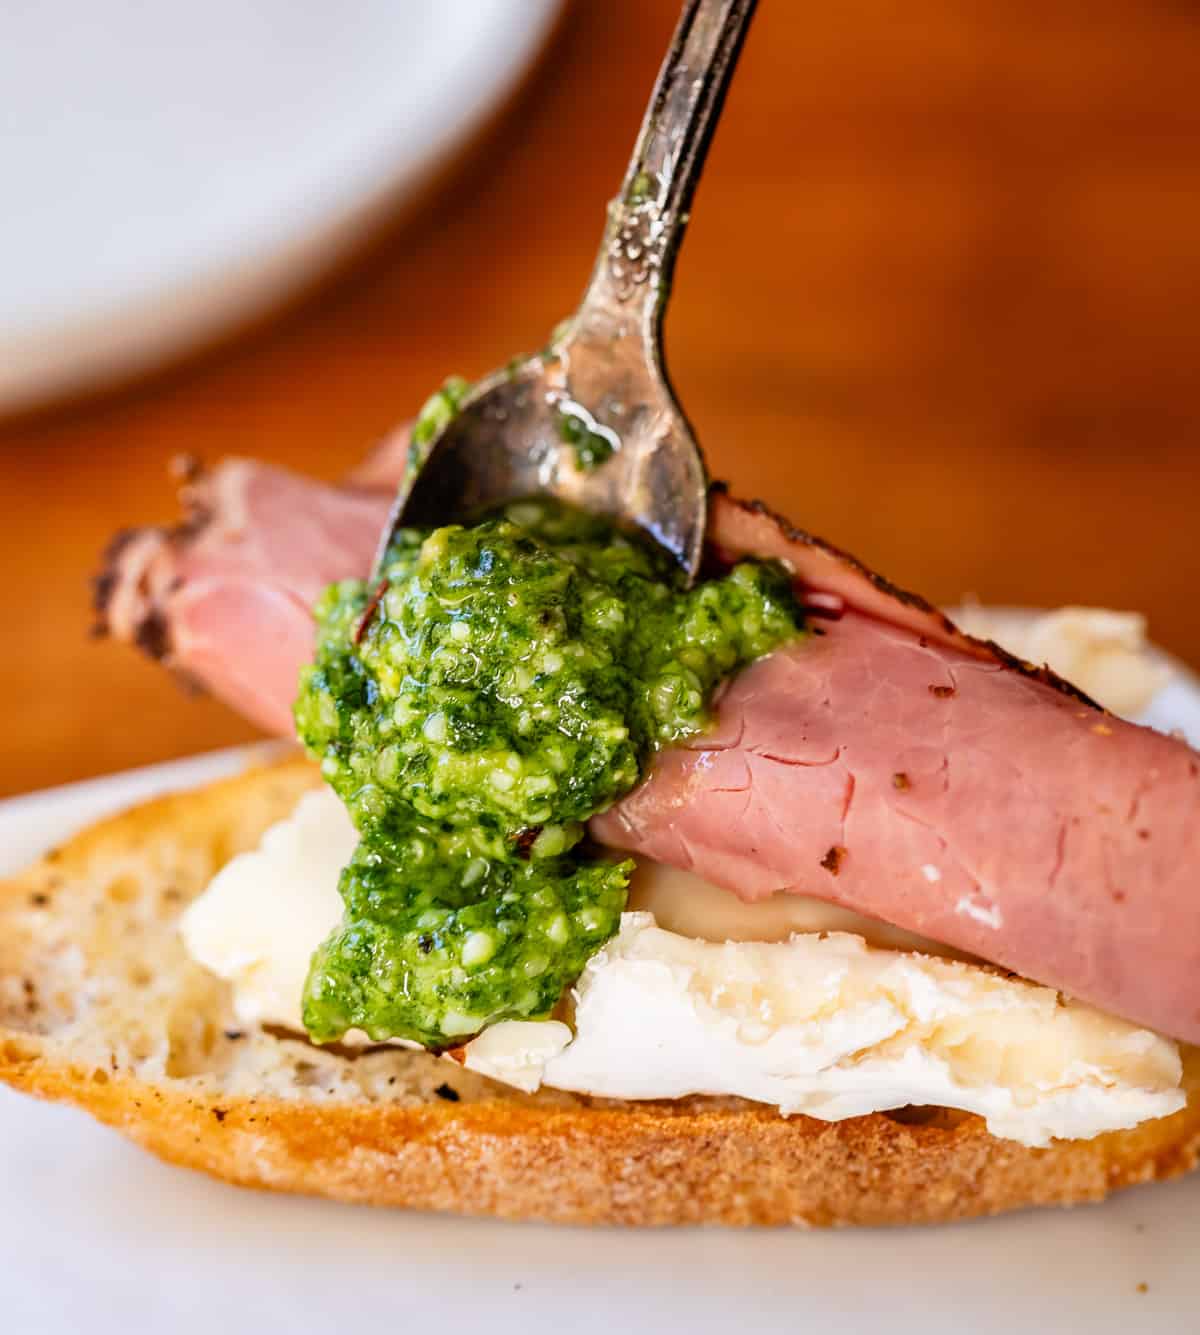 Arranging a bite of triple-cream cheese, deli-cut roast beef, homemade pesto, on a slice of baguette close up.